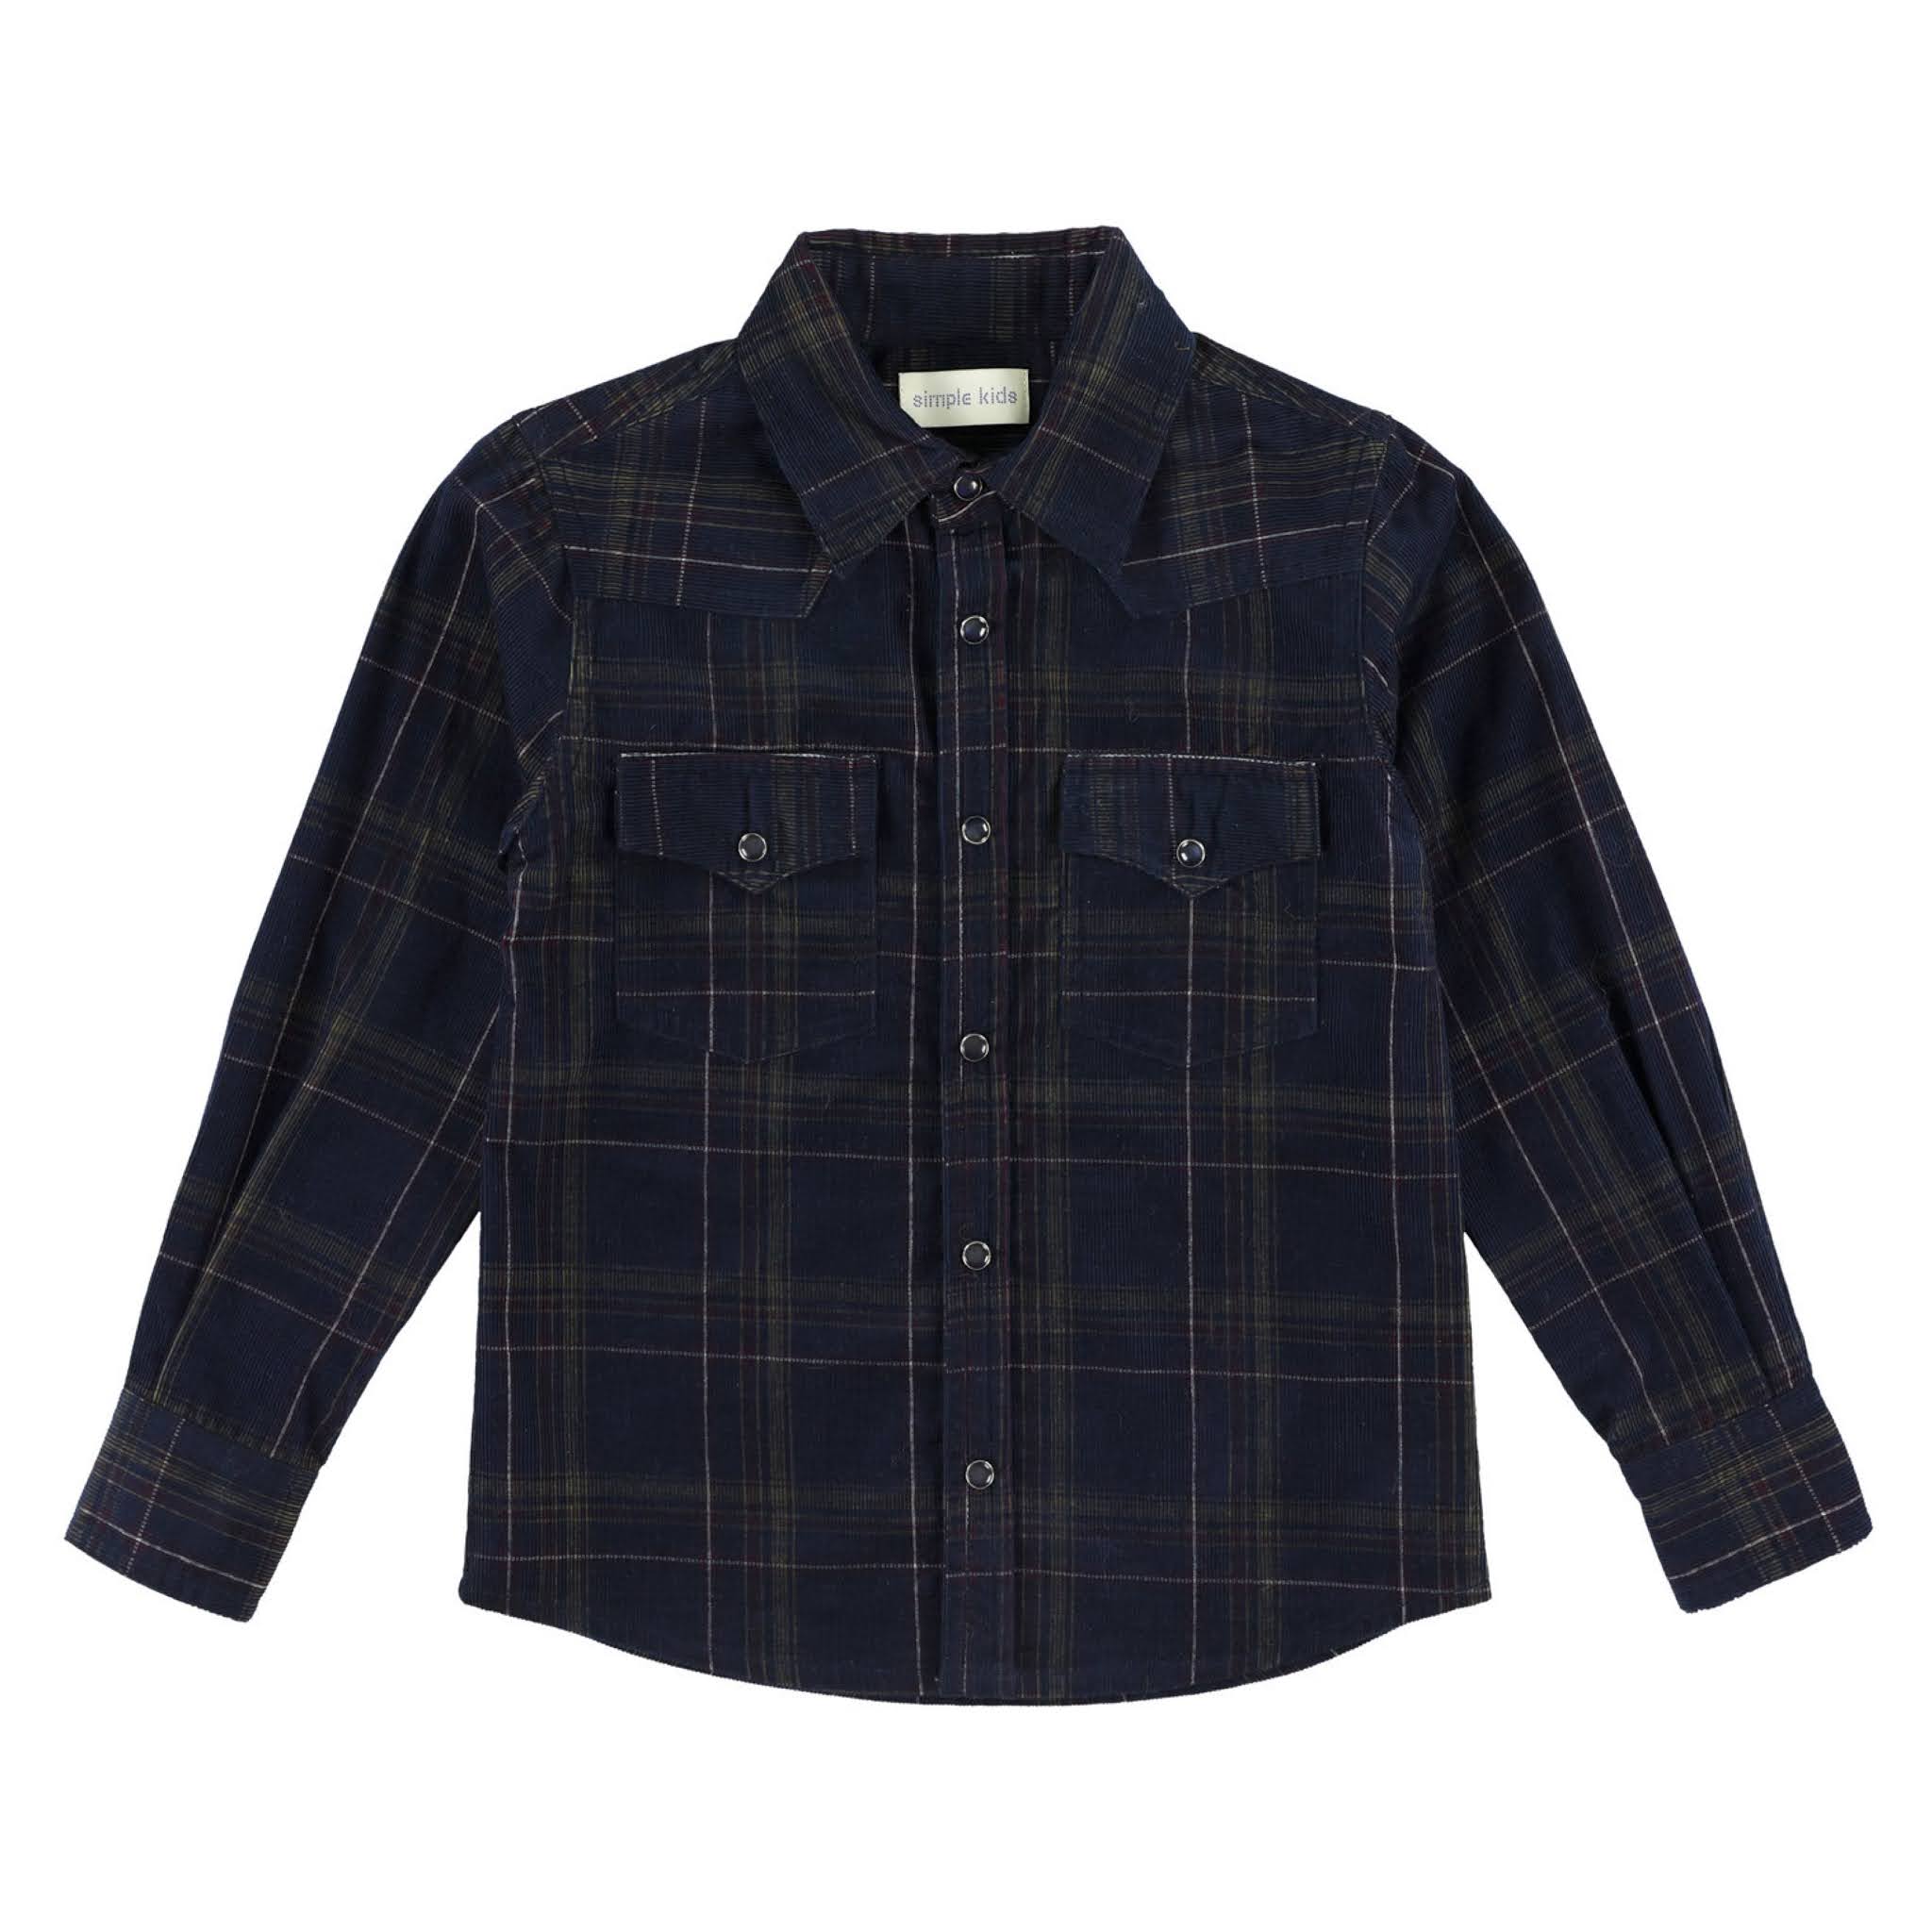 Boys Navy Blue Button Up Shirt from Simple Kids